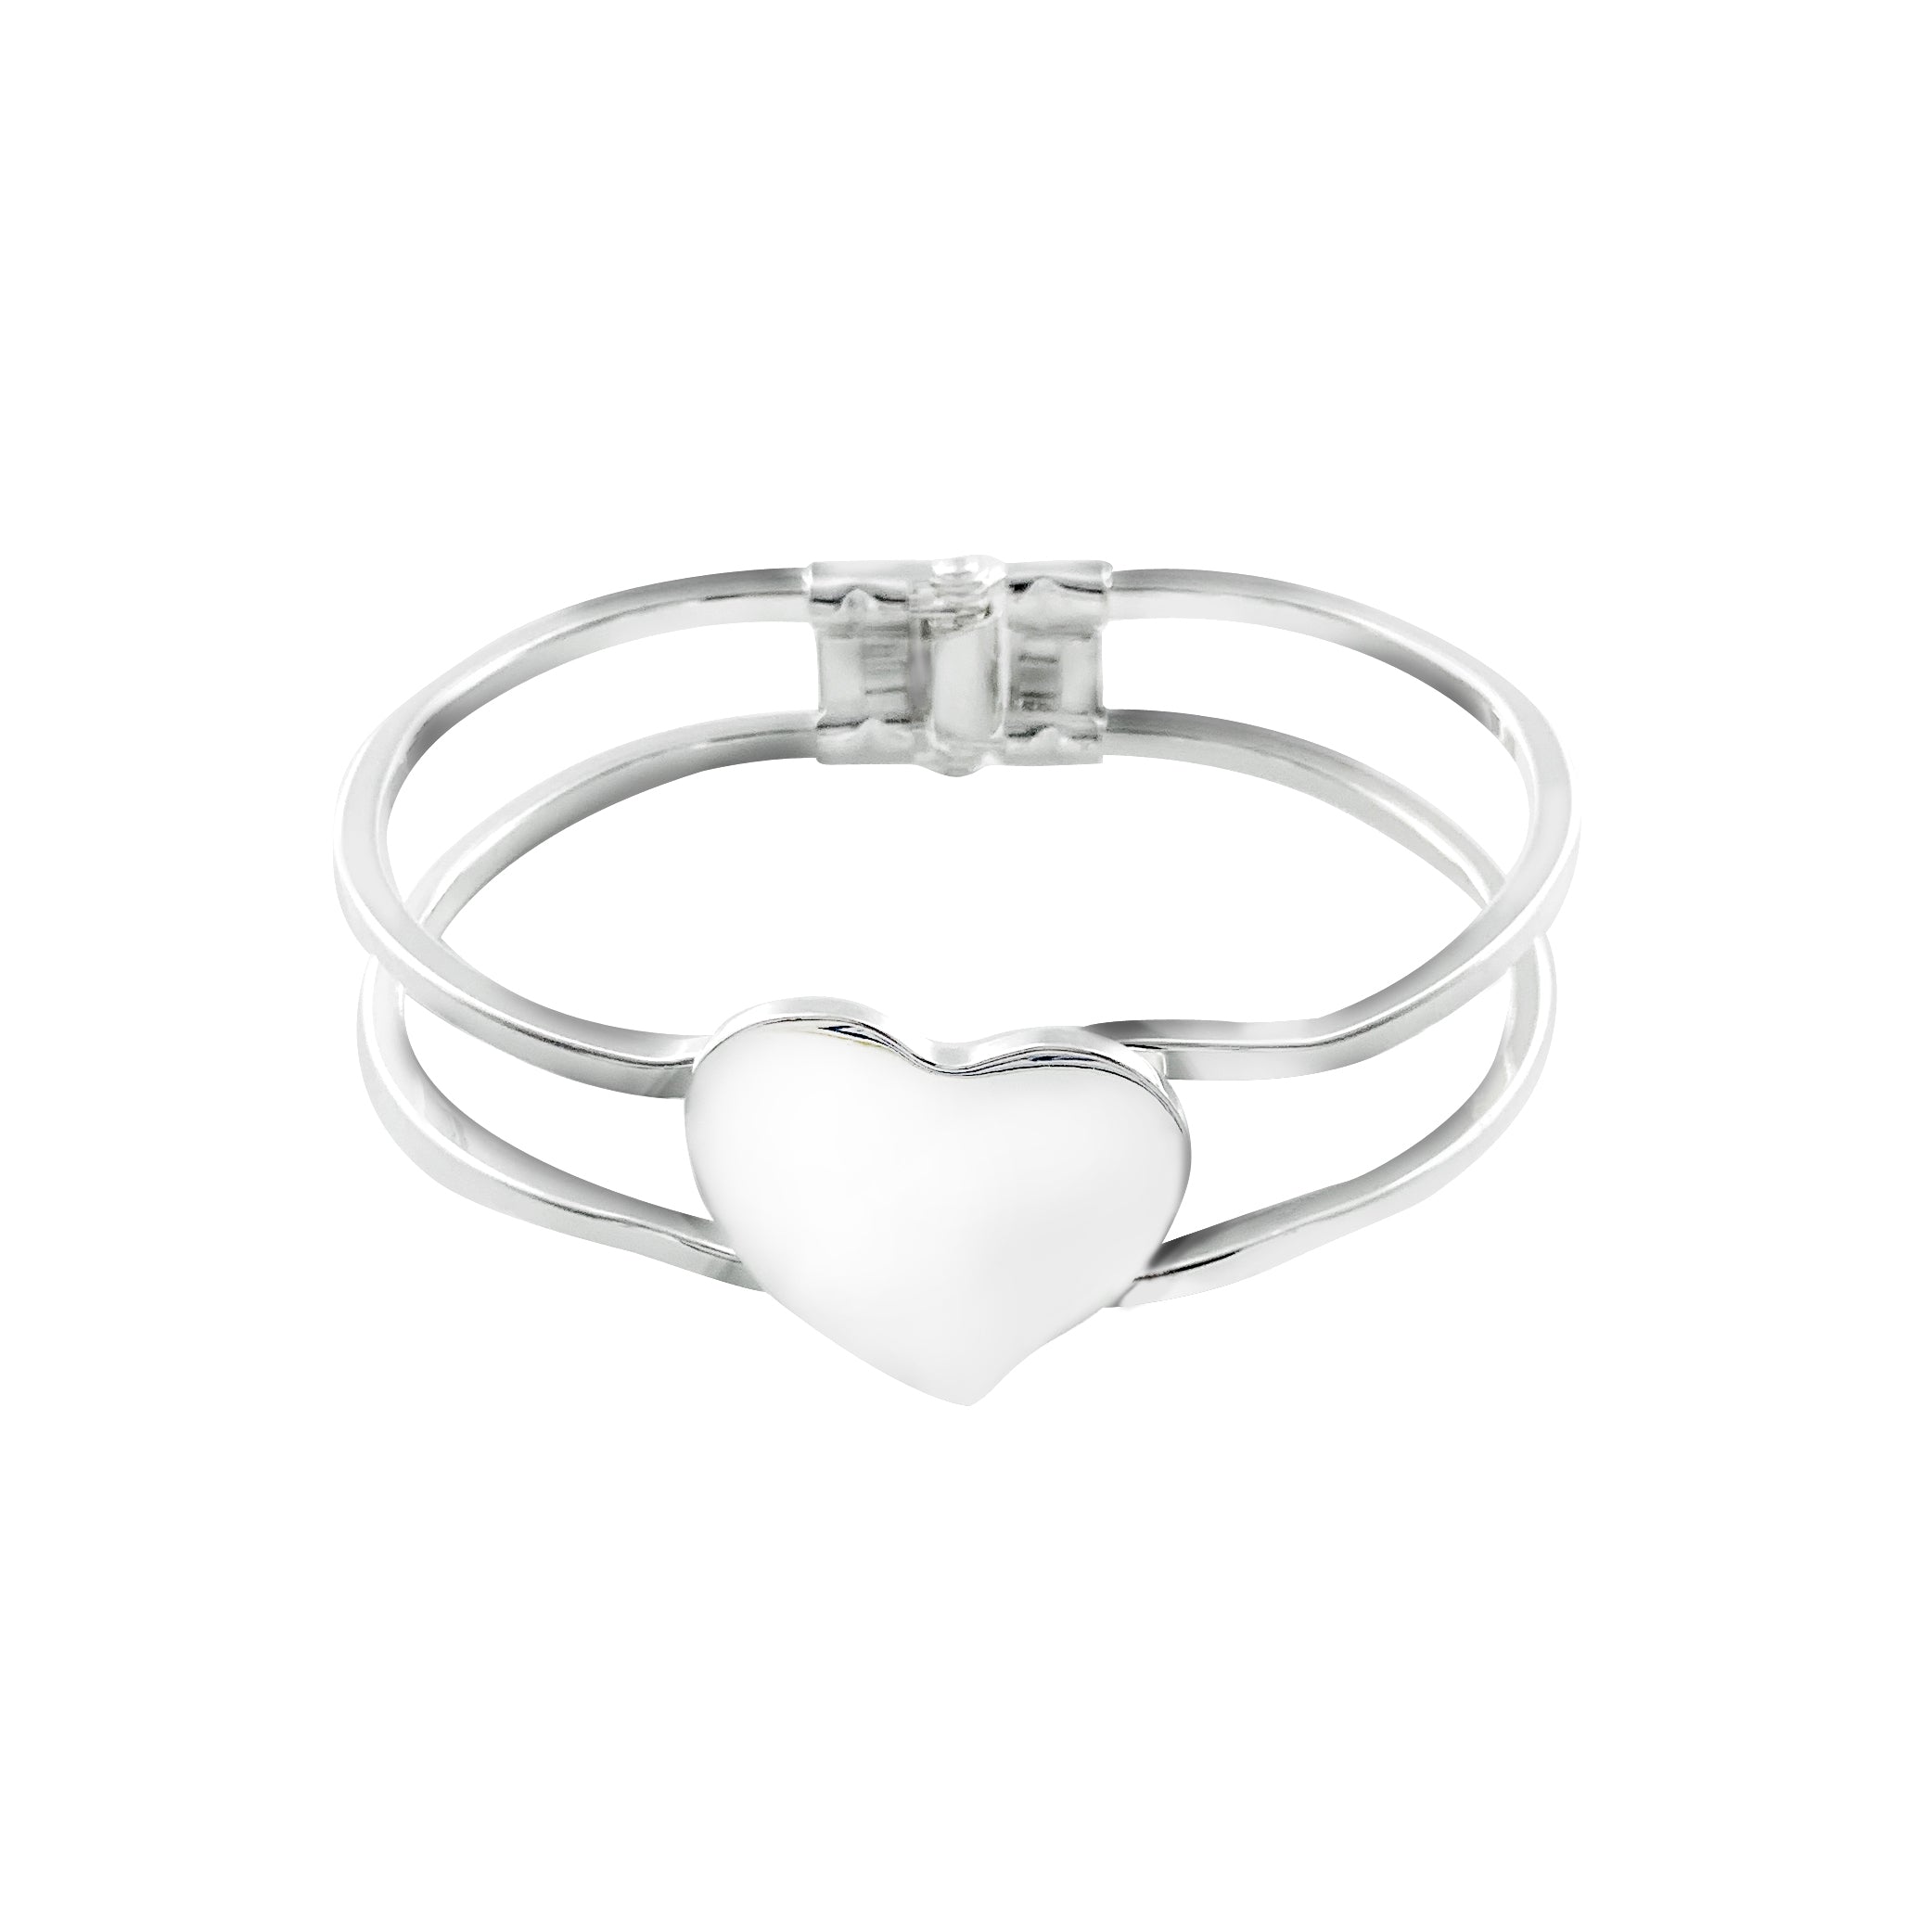 Thin silver bangle with heart design – The Paper Stone